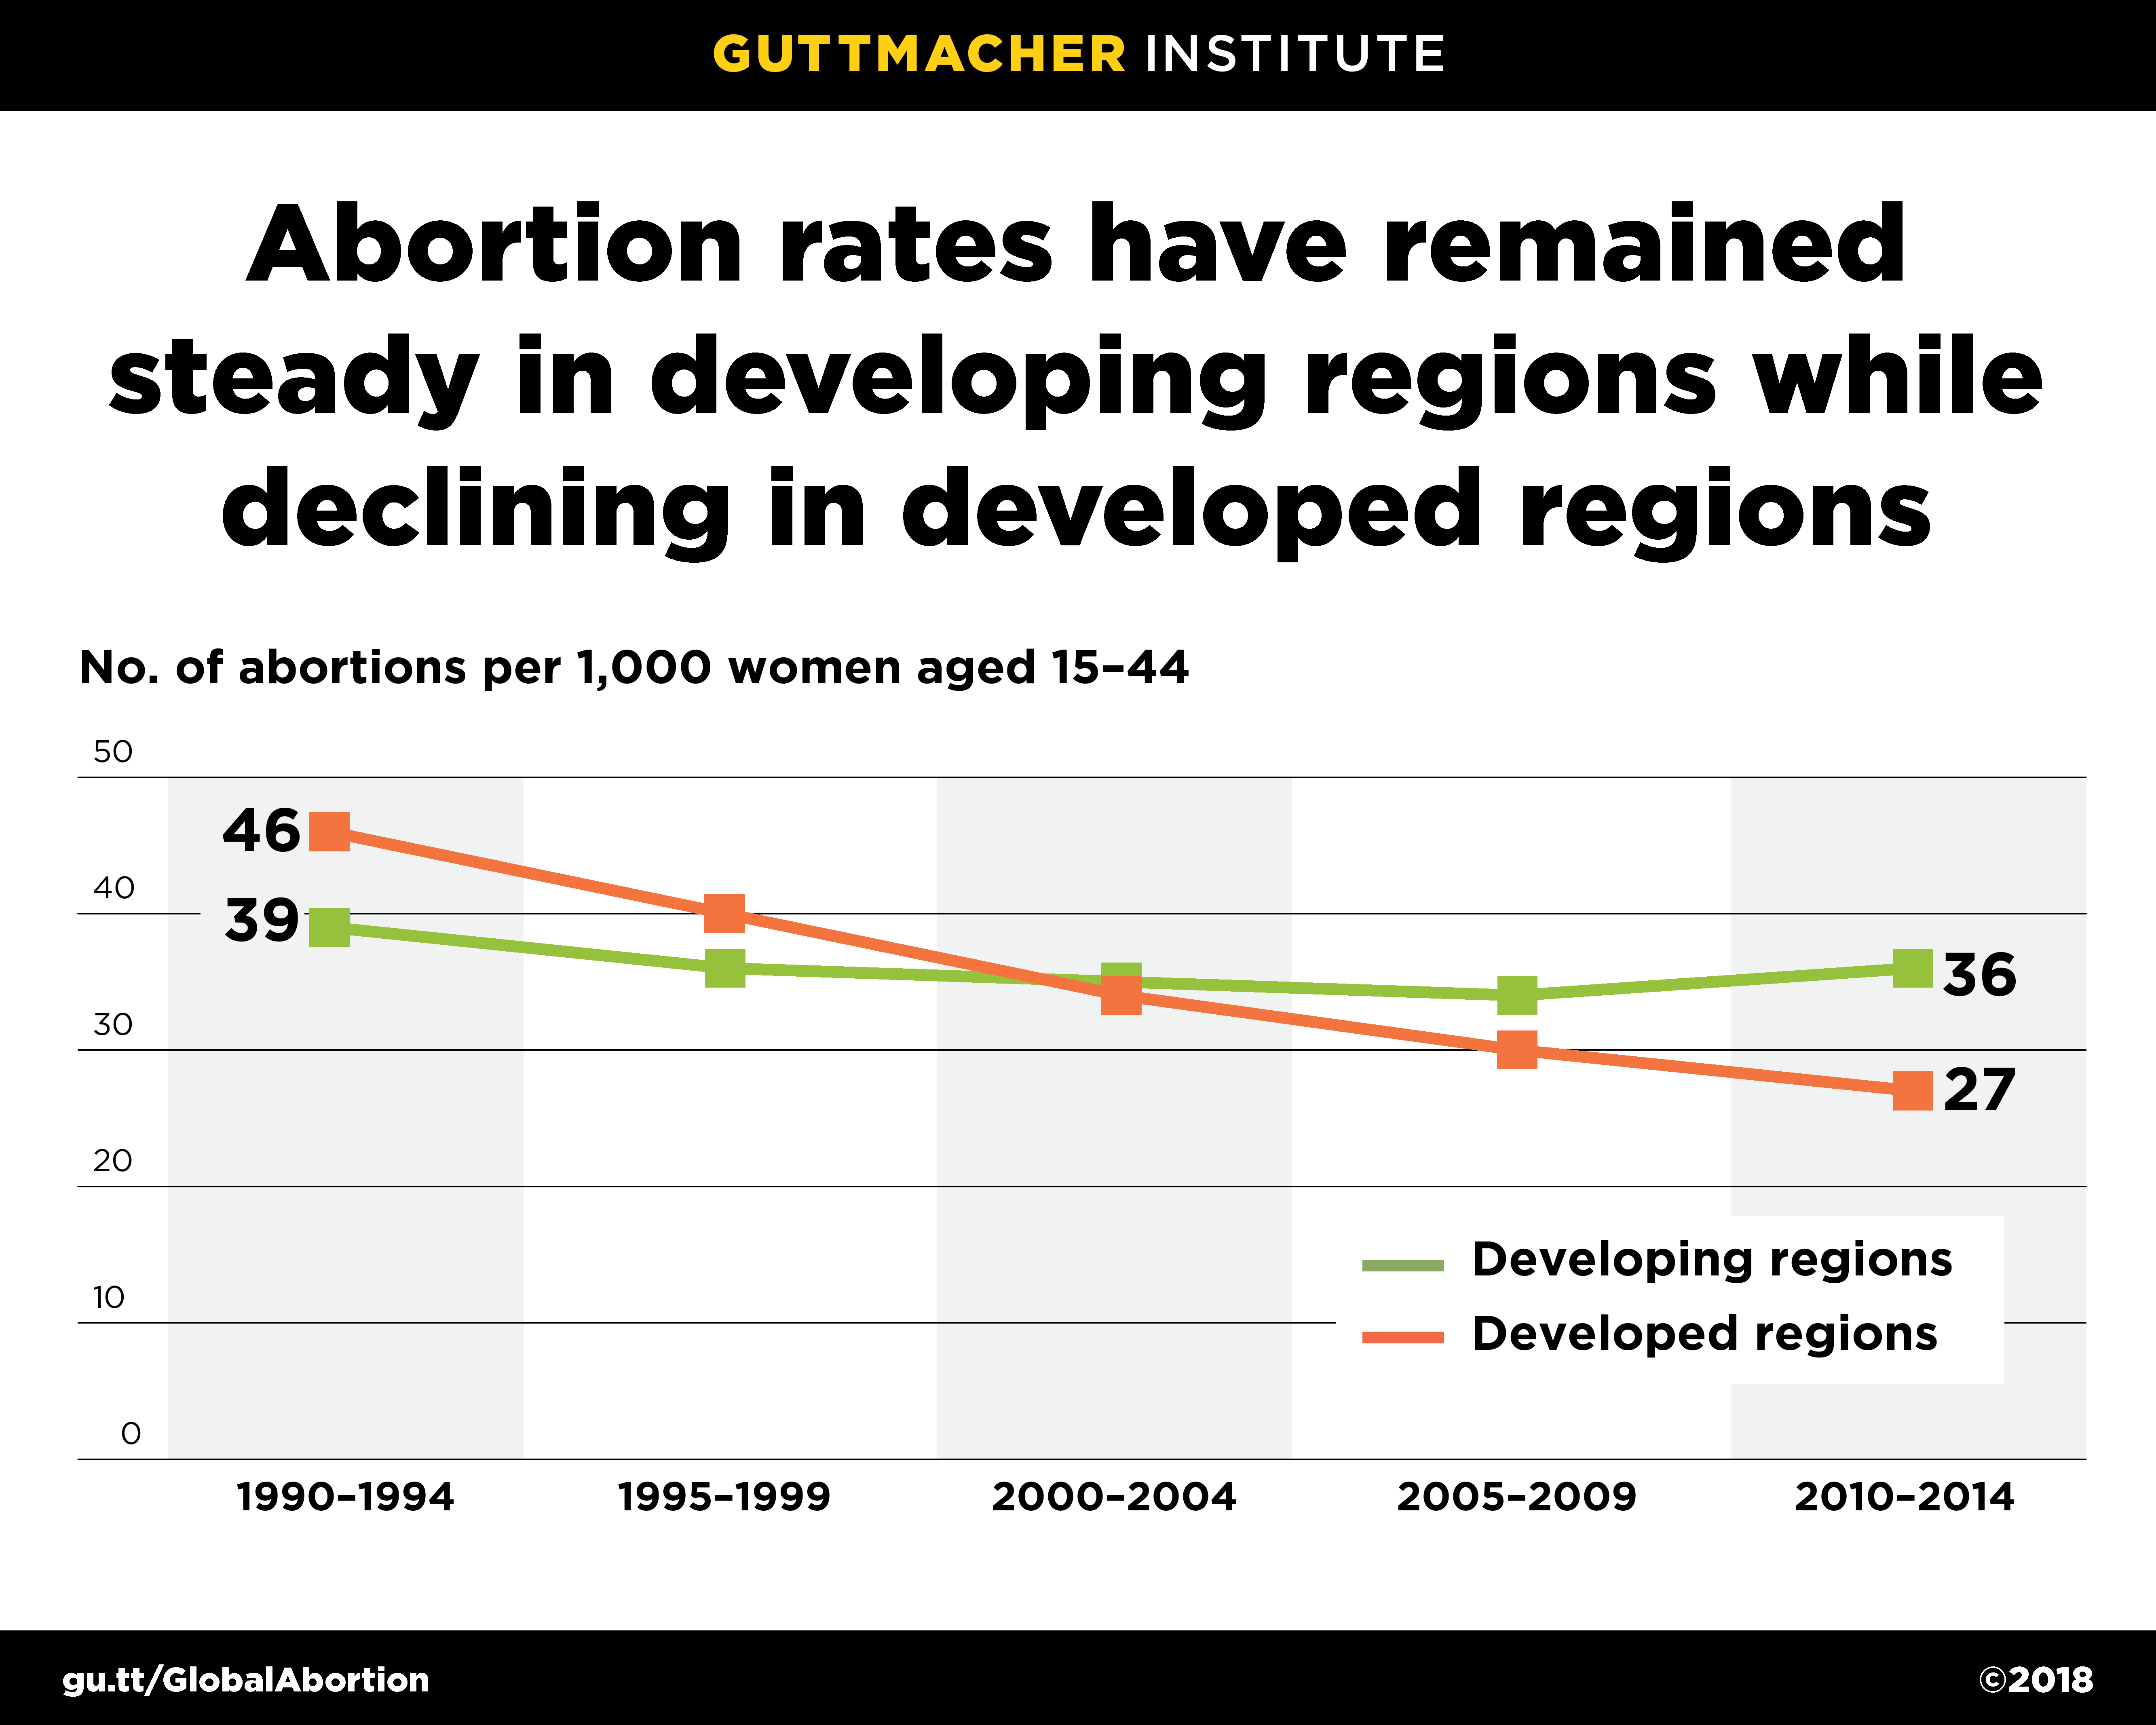 Graph: Abortion rates remained steady in developing regions from 1990 to 2014, while declining in developed regions